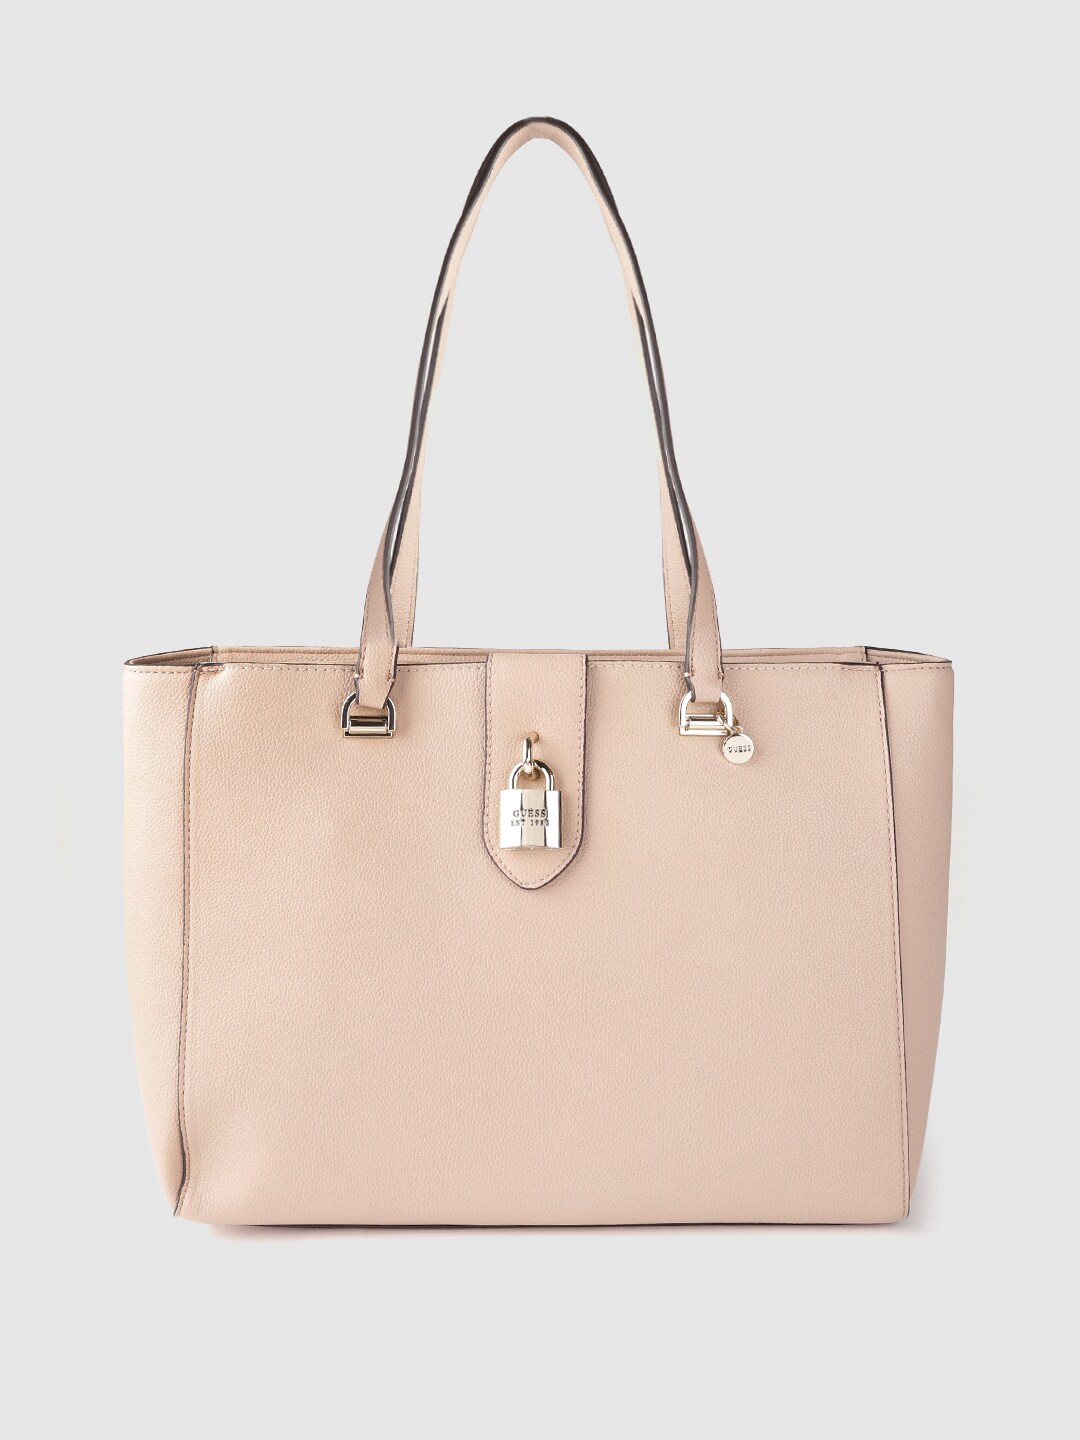 GUESS Pink Solid Structured Shoulder Bag with Pouch Price in India